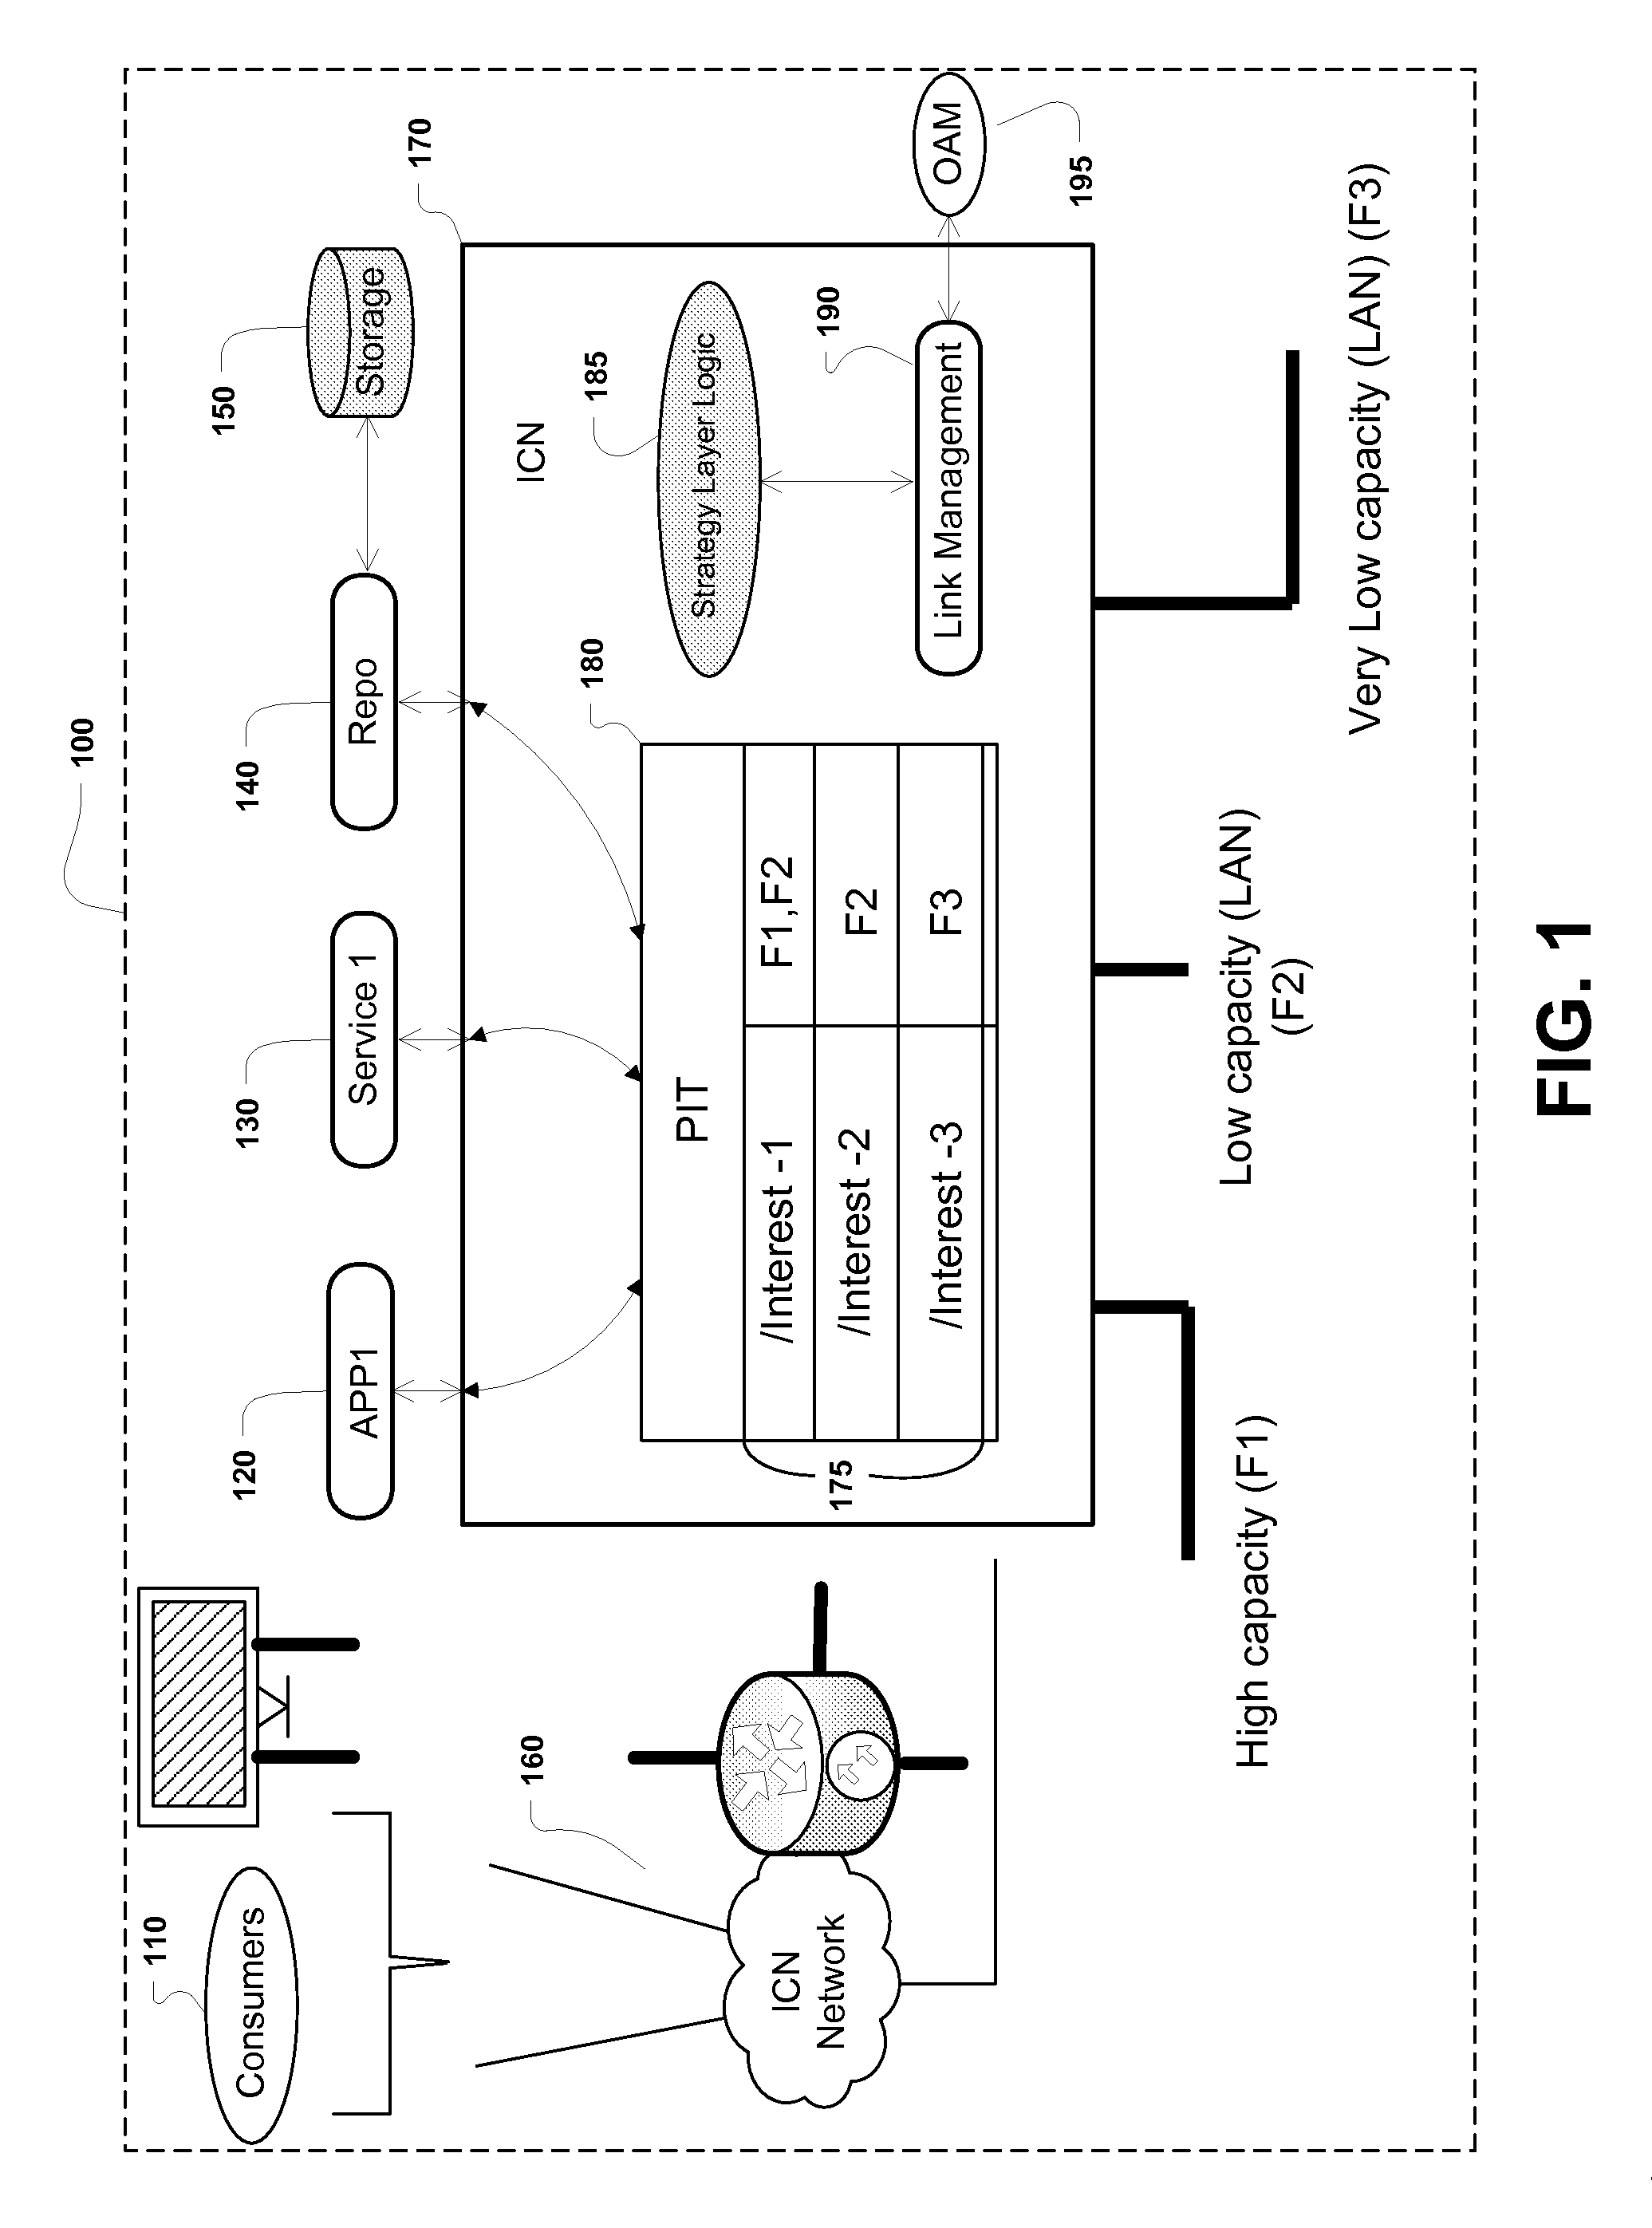 Method and apparatus for interface capability and elastic content response encoding in information centric networking